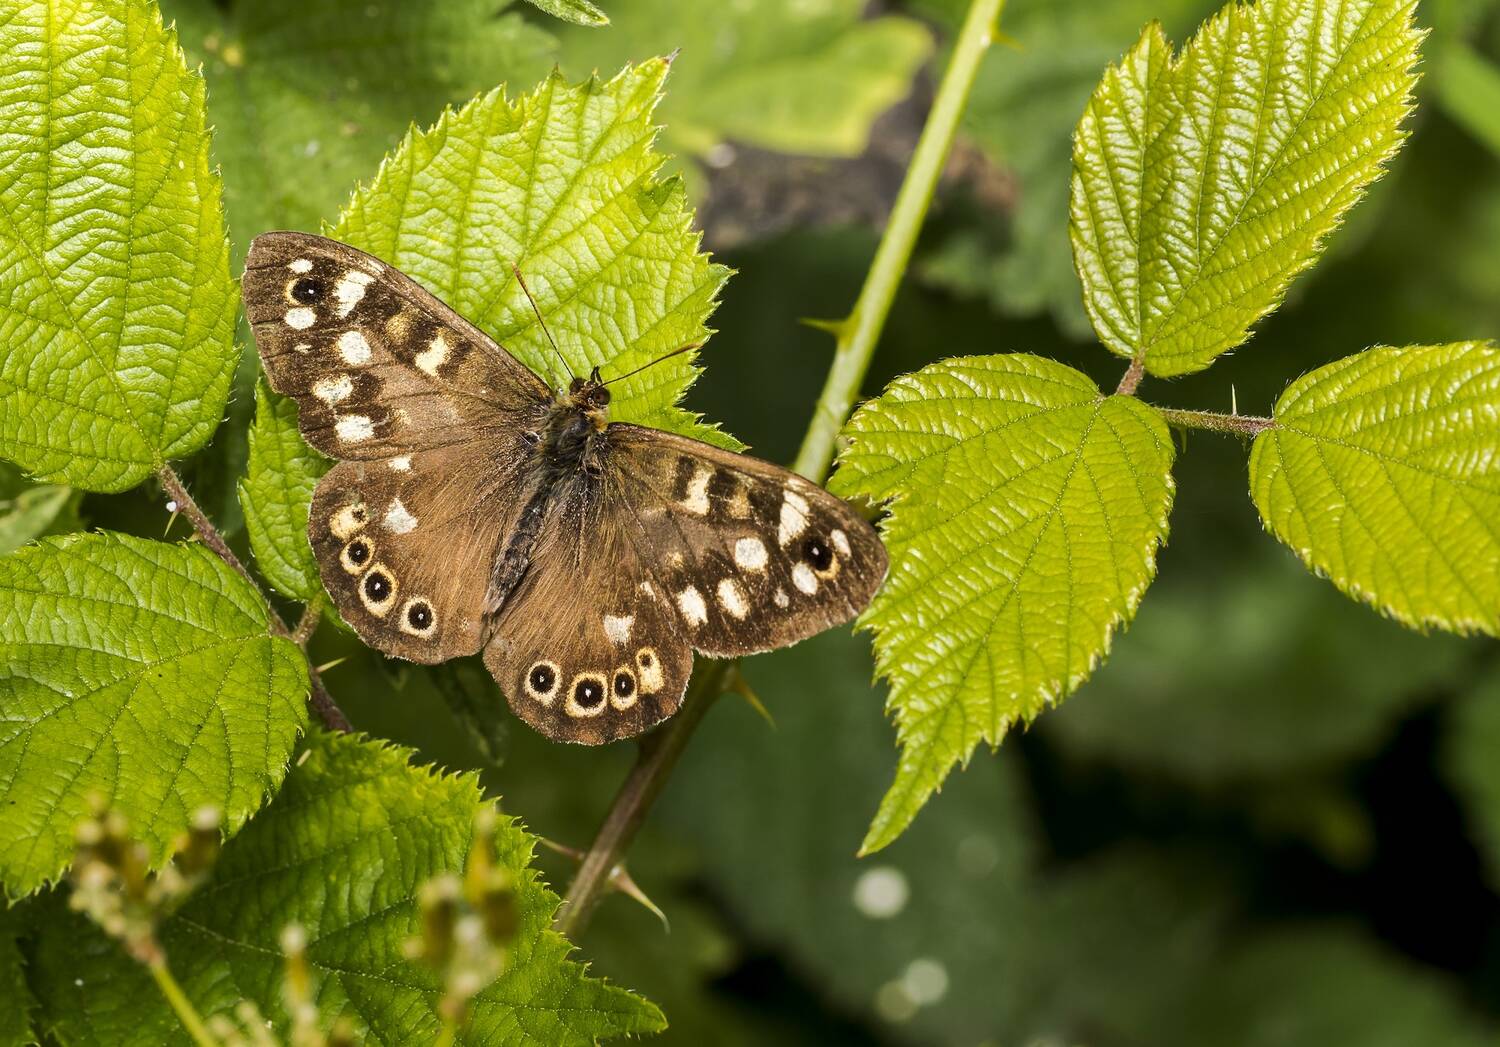 A mostly brown butterfly, with white spots around the edge of its wings, rests with its wings wide open on some bright green leaves.